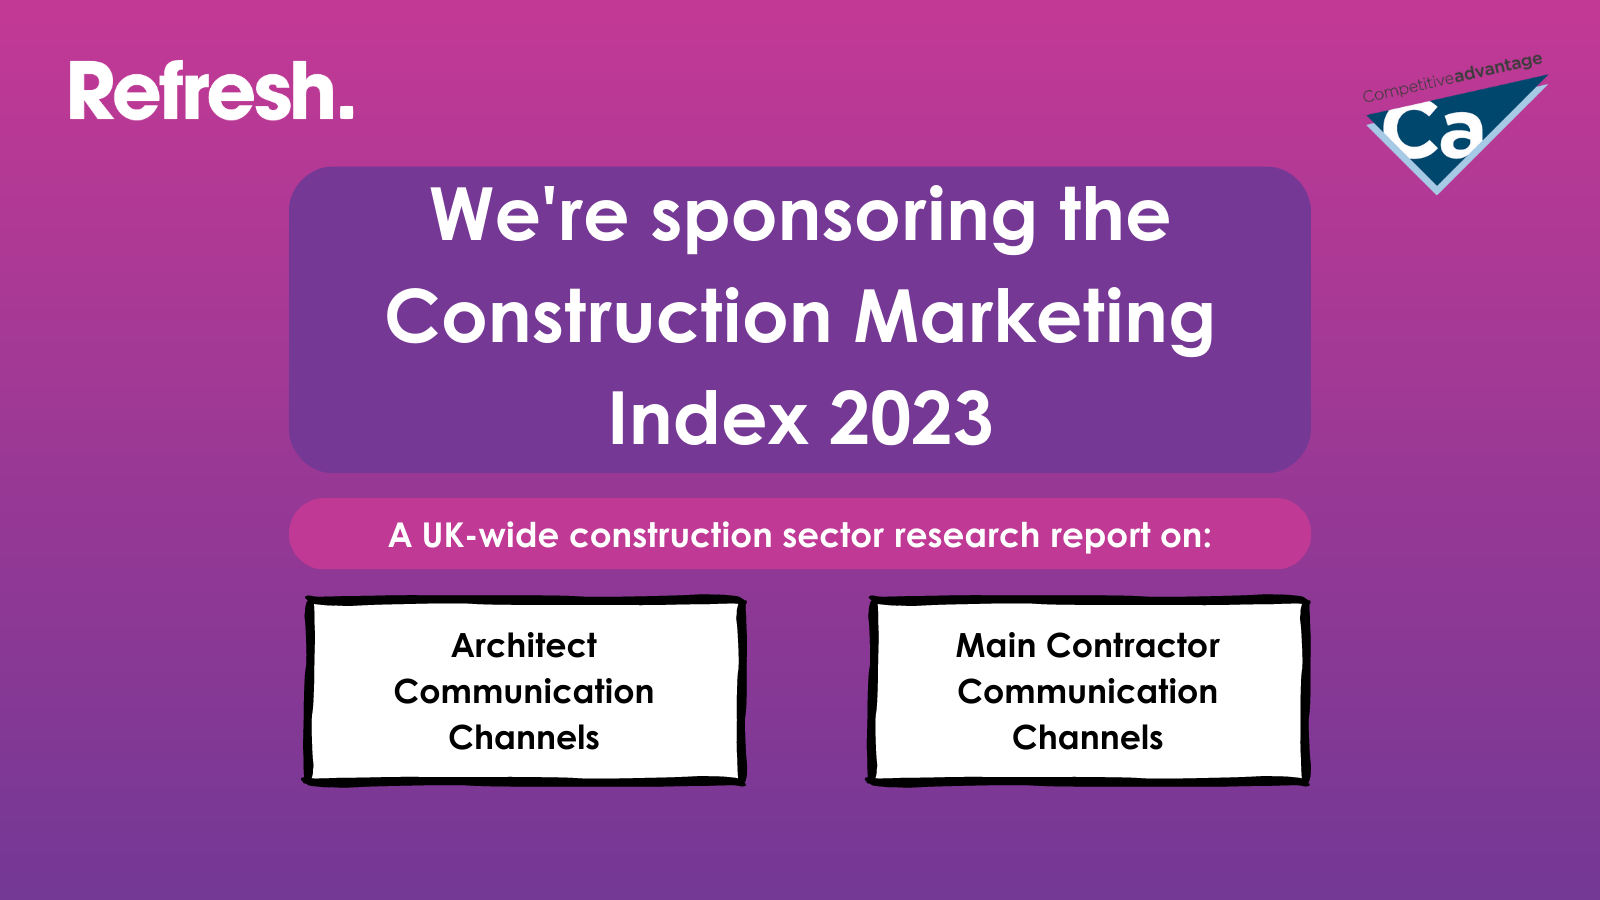 Asset announcing that Refresh are sponsoring the Construction Marketing Index 2023